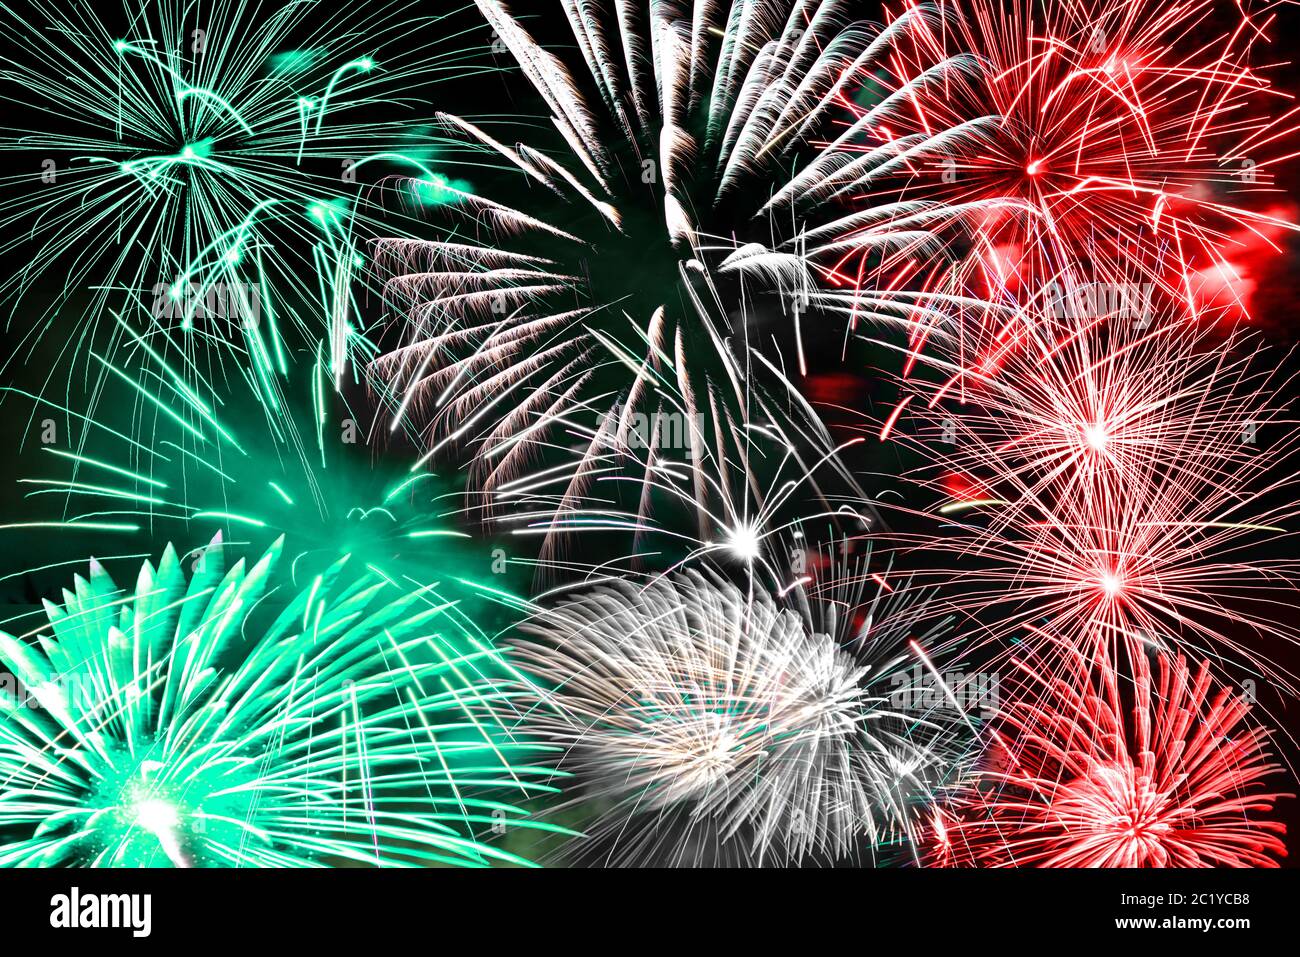 Green white and red fireworks background Stock Photo